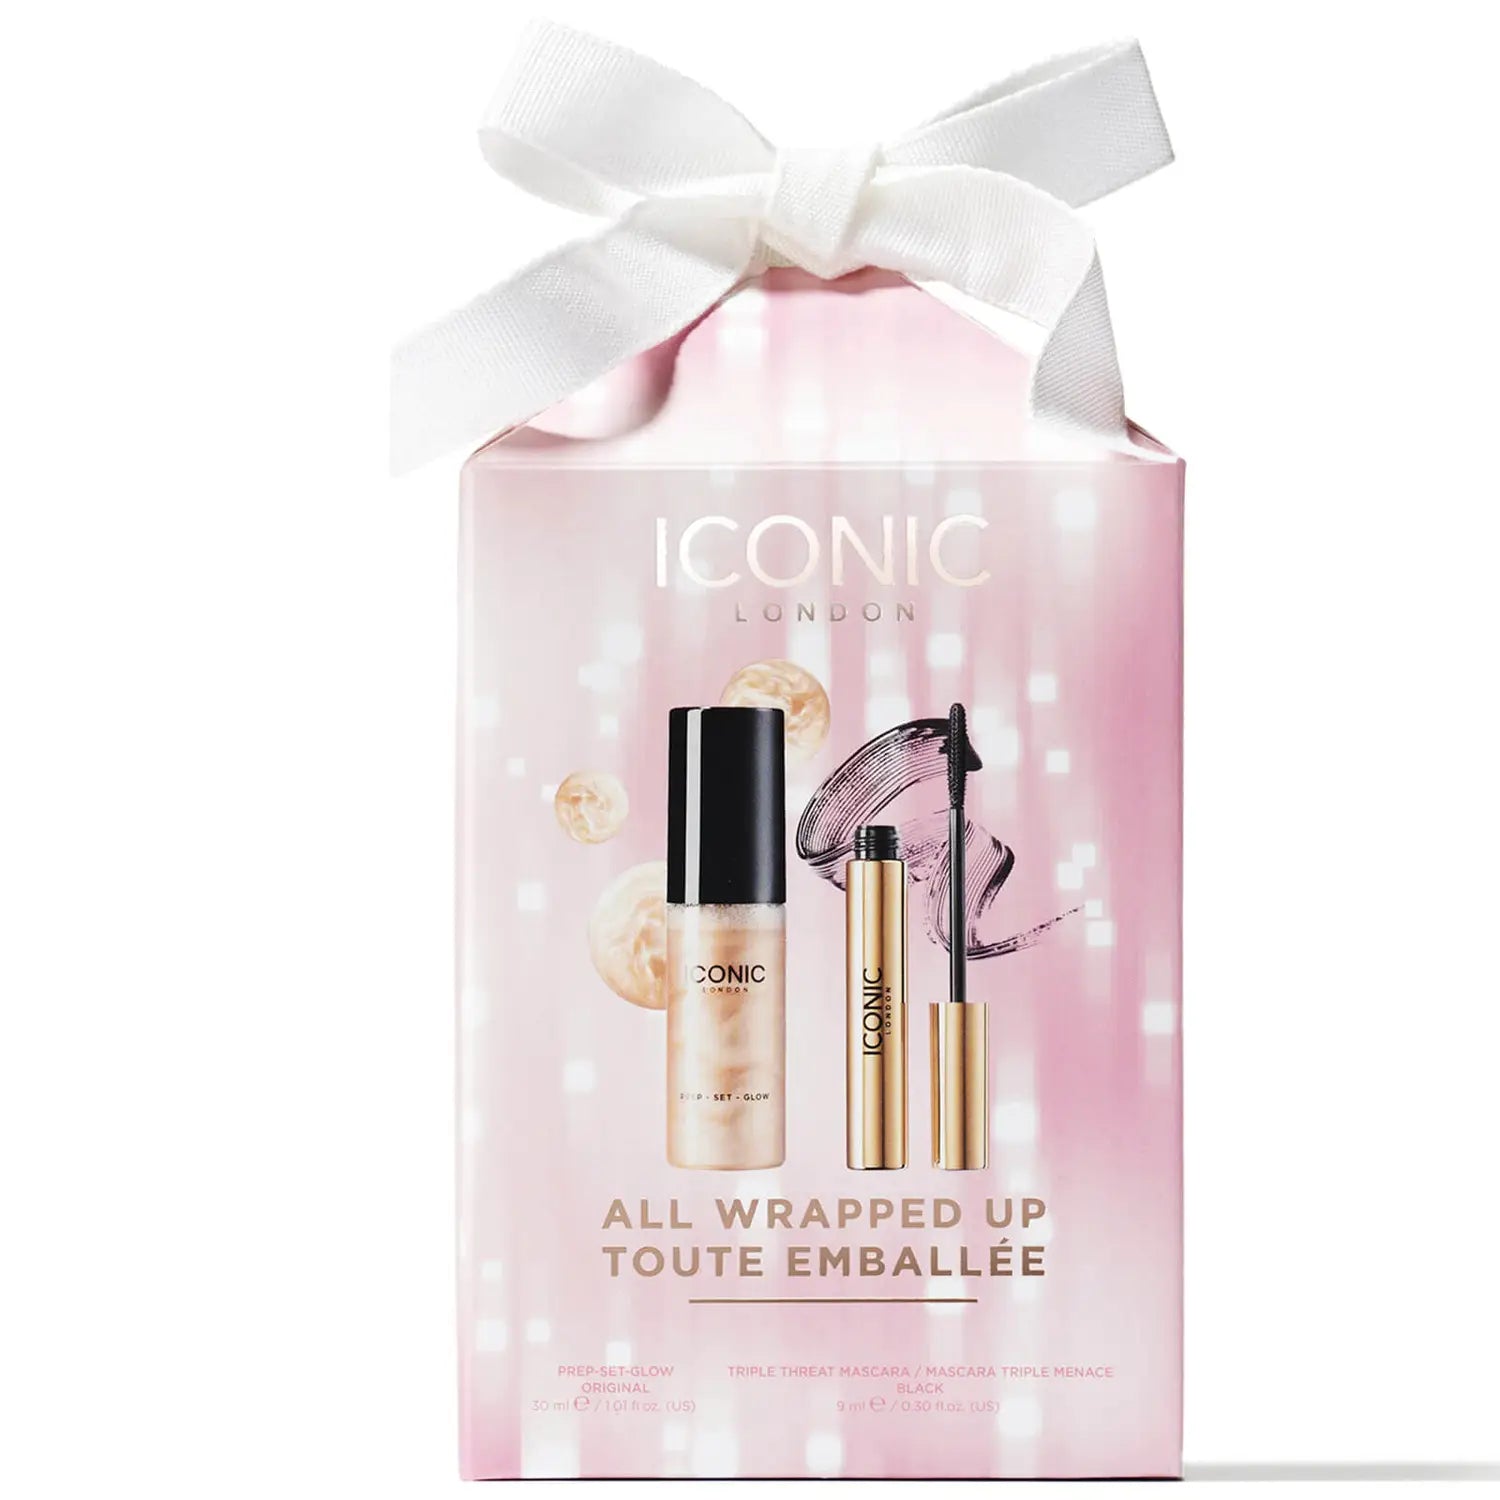 ICONIC London All Wrapped Up, packaging